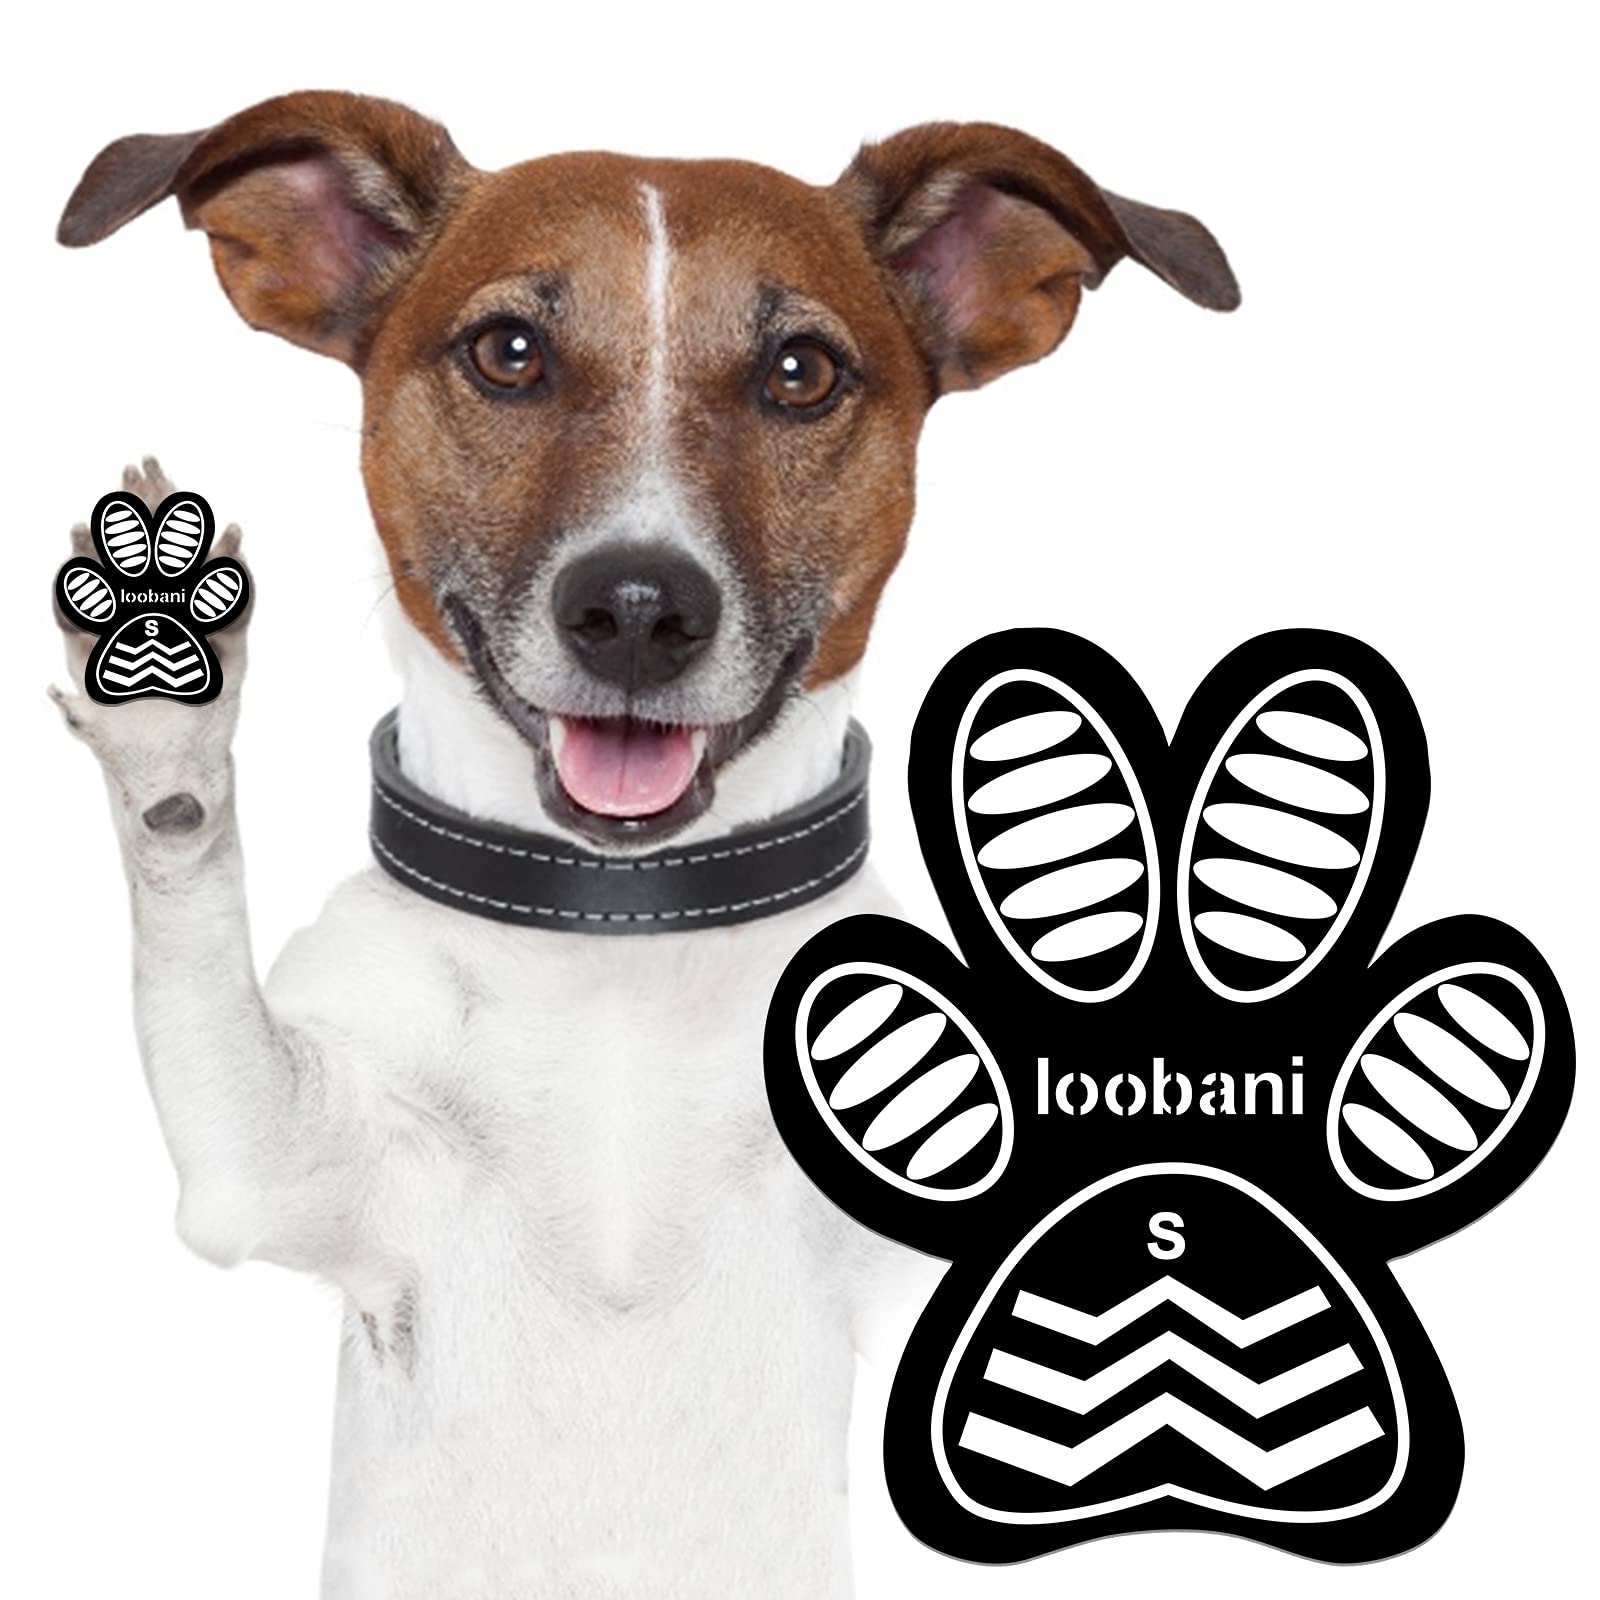 LOOBANI Dog Grip Pad Paw Protector Anti-Slip Traction Pads from Slipping on  Slippery Floors, Protection for Injuries and Brace for Weak Paws(6 Sets 24  Pads-S) 6 Sets 24 Pads S (1-5/8x1-3/8, 4-10